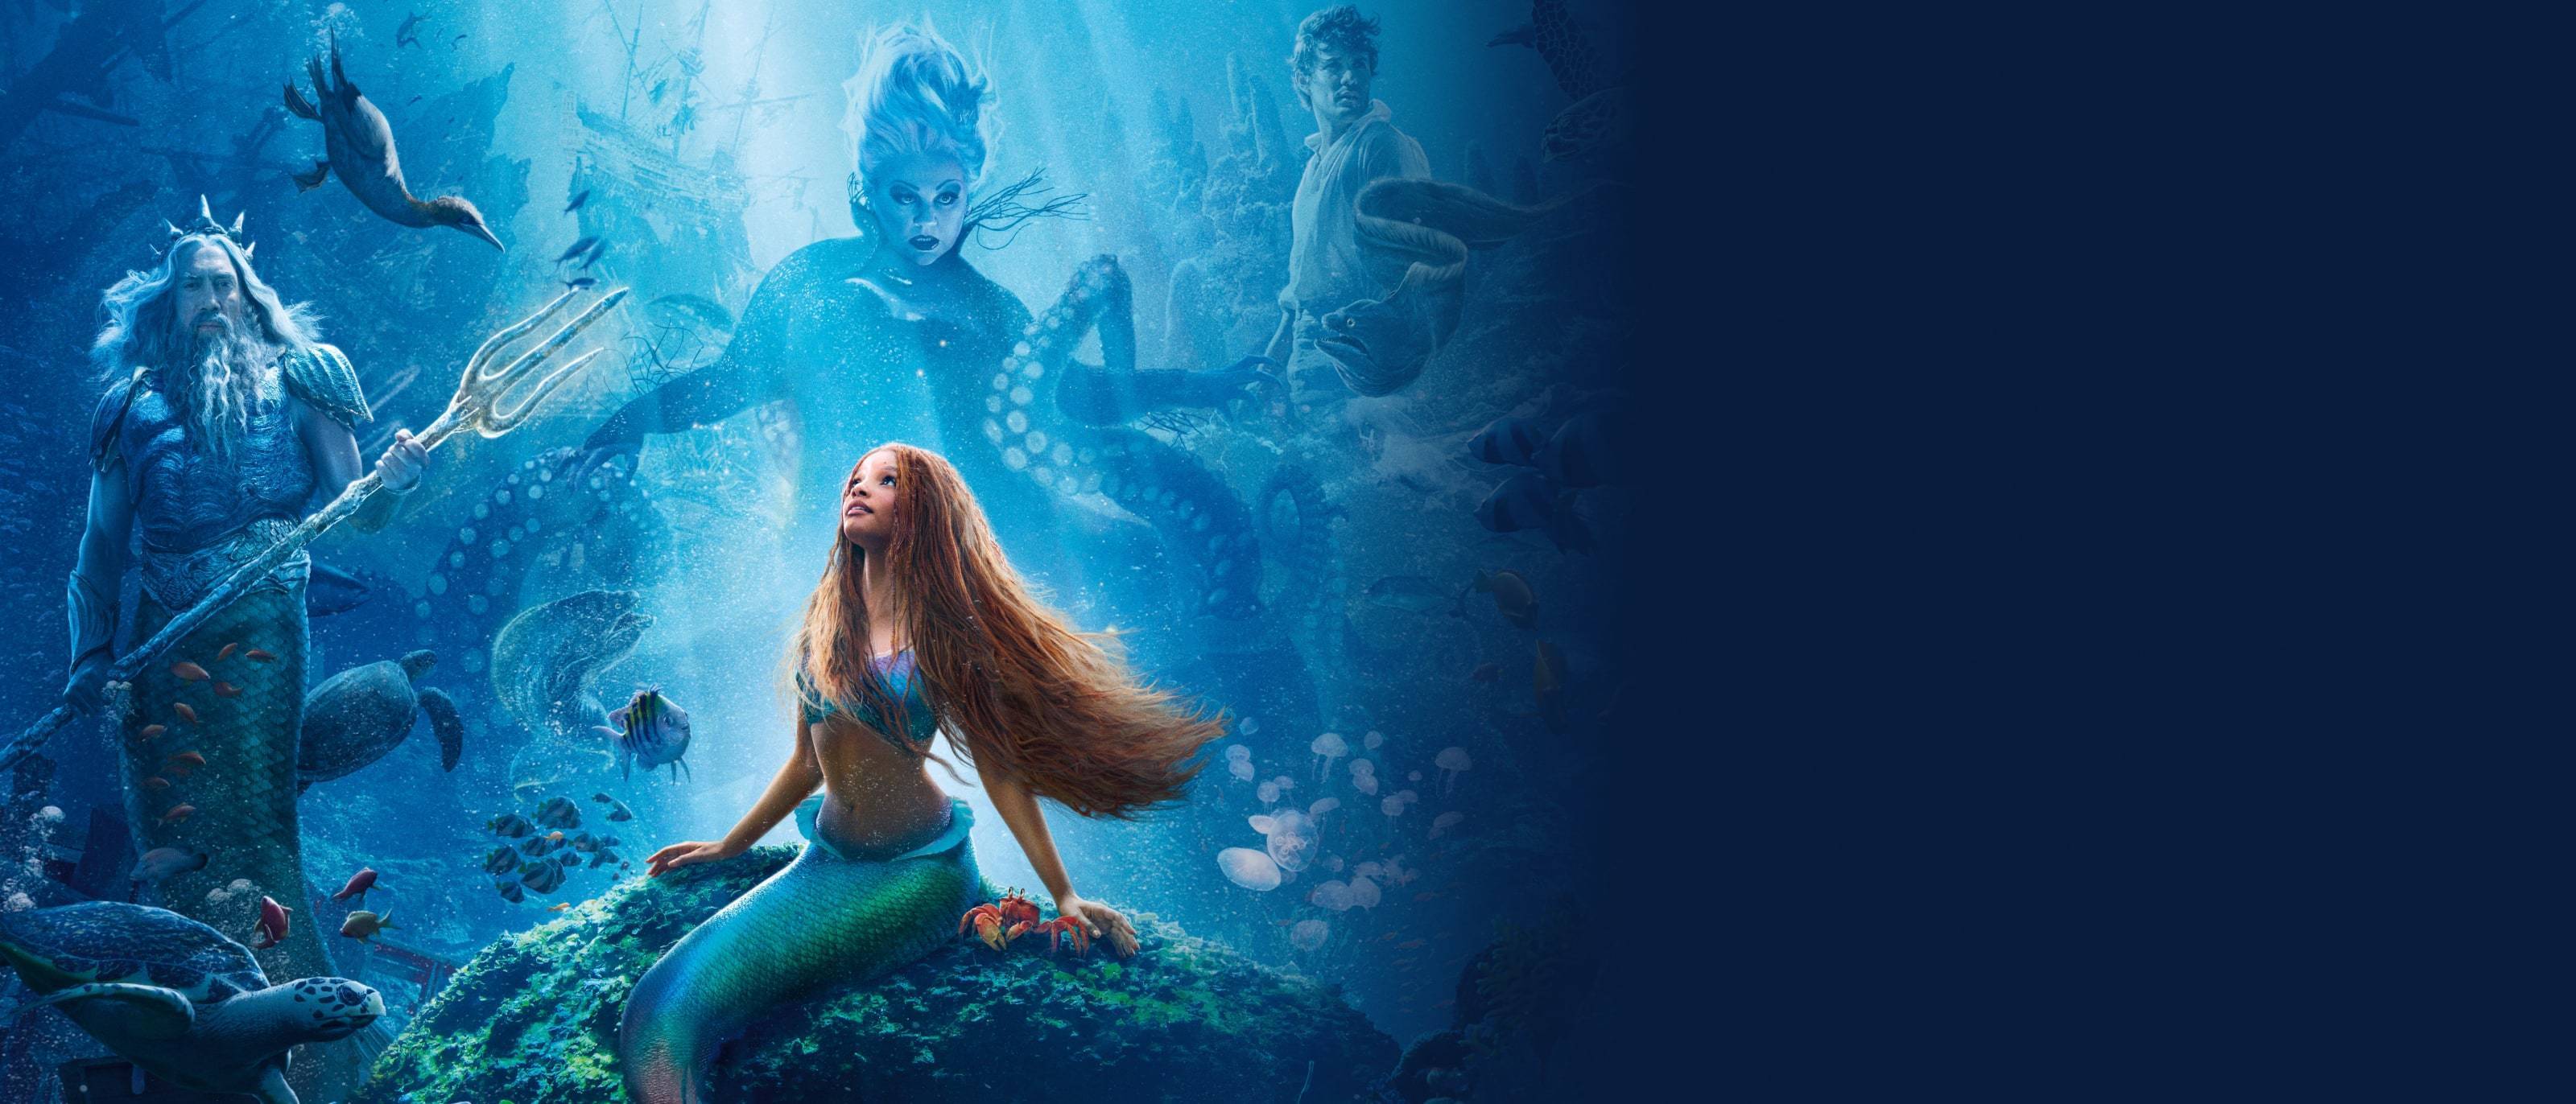 Find out more about The Little Mermaid